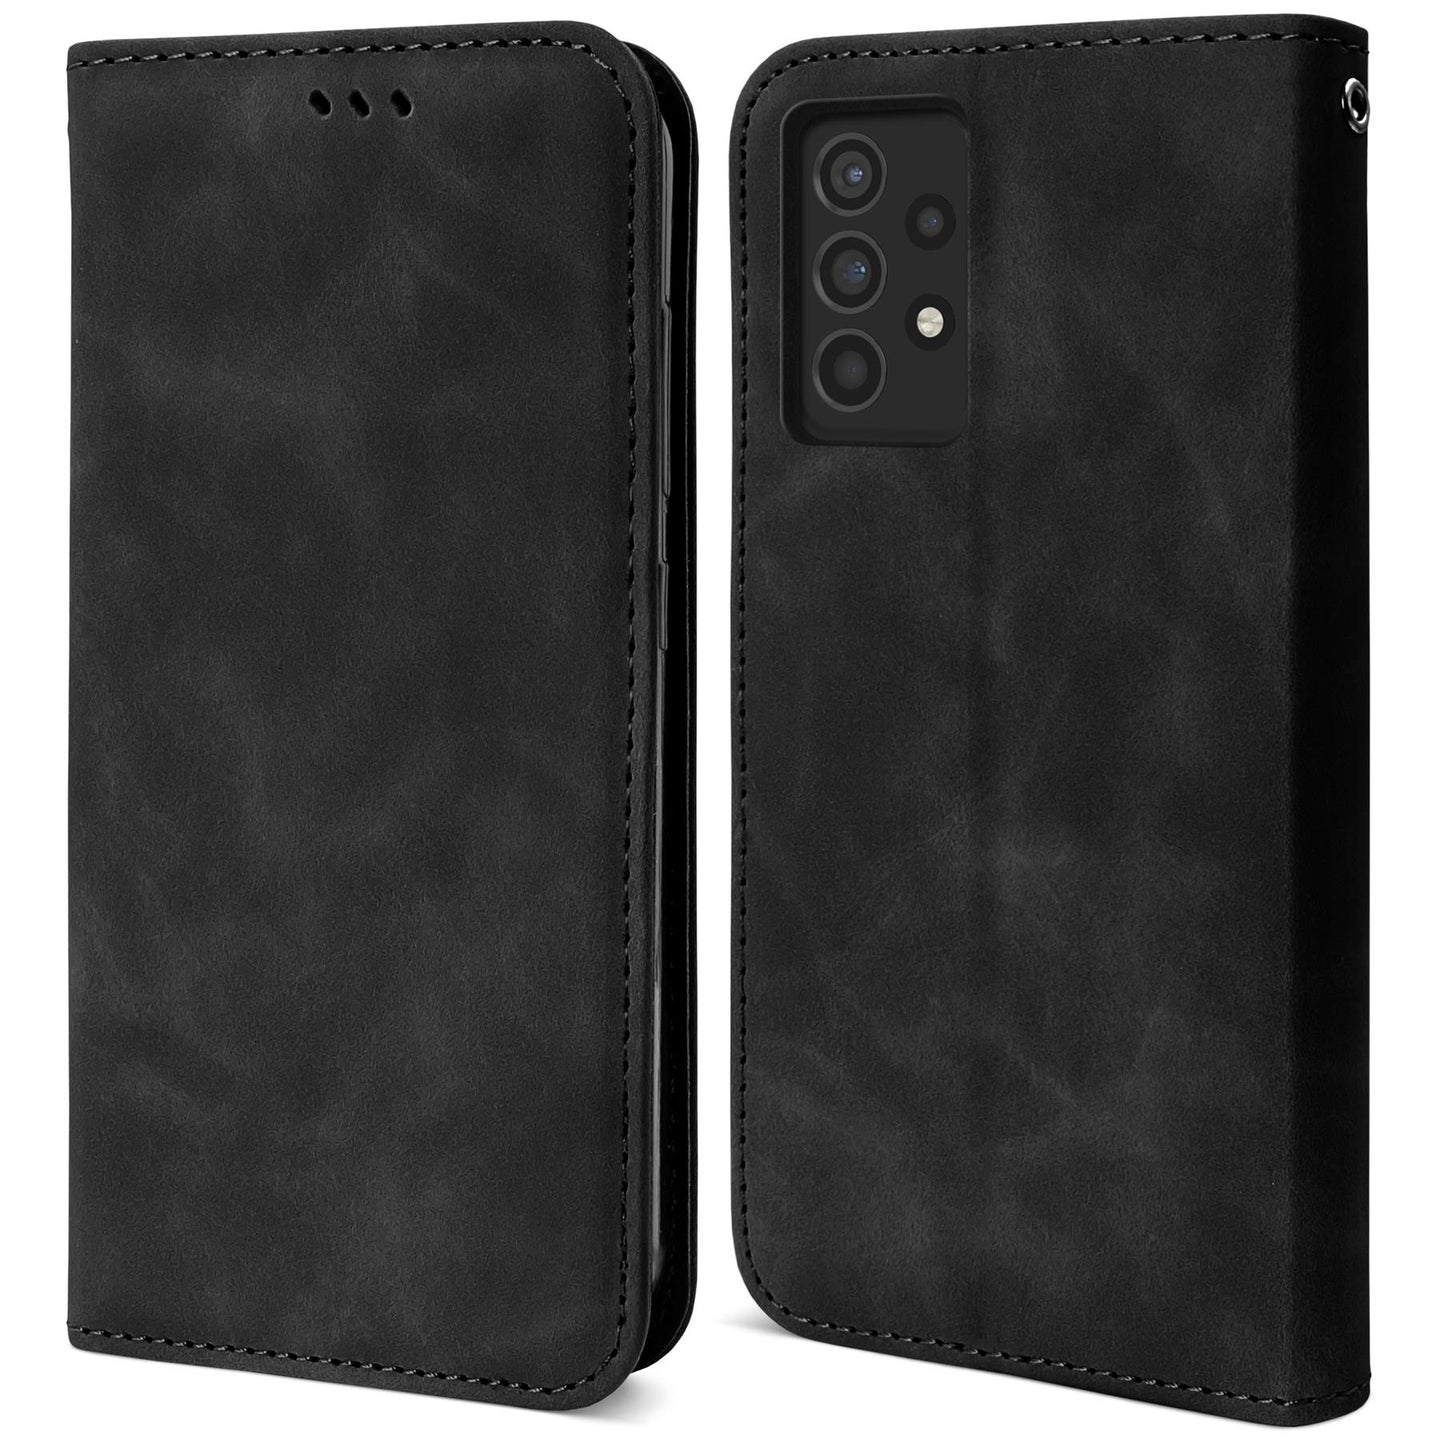 Moozy Marble Black Flip Case for Samsung A52s 5G and Samsung A52 - Flip Cover Magnetic Flip Folio Retro Wallet Case with Card Holder and Stand, Credit Card Slots, Kickstand Function